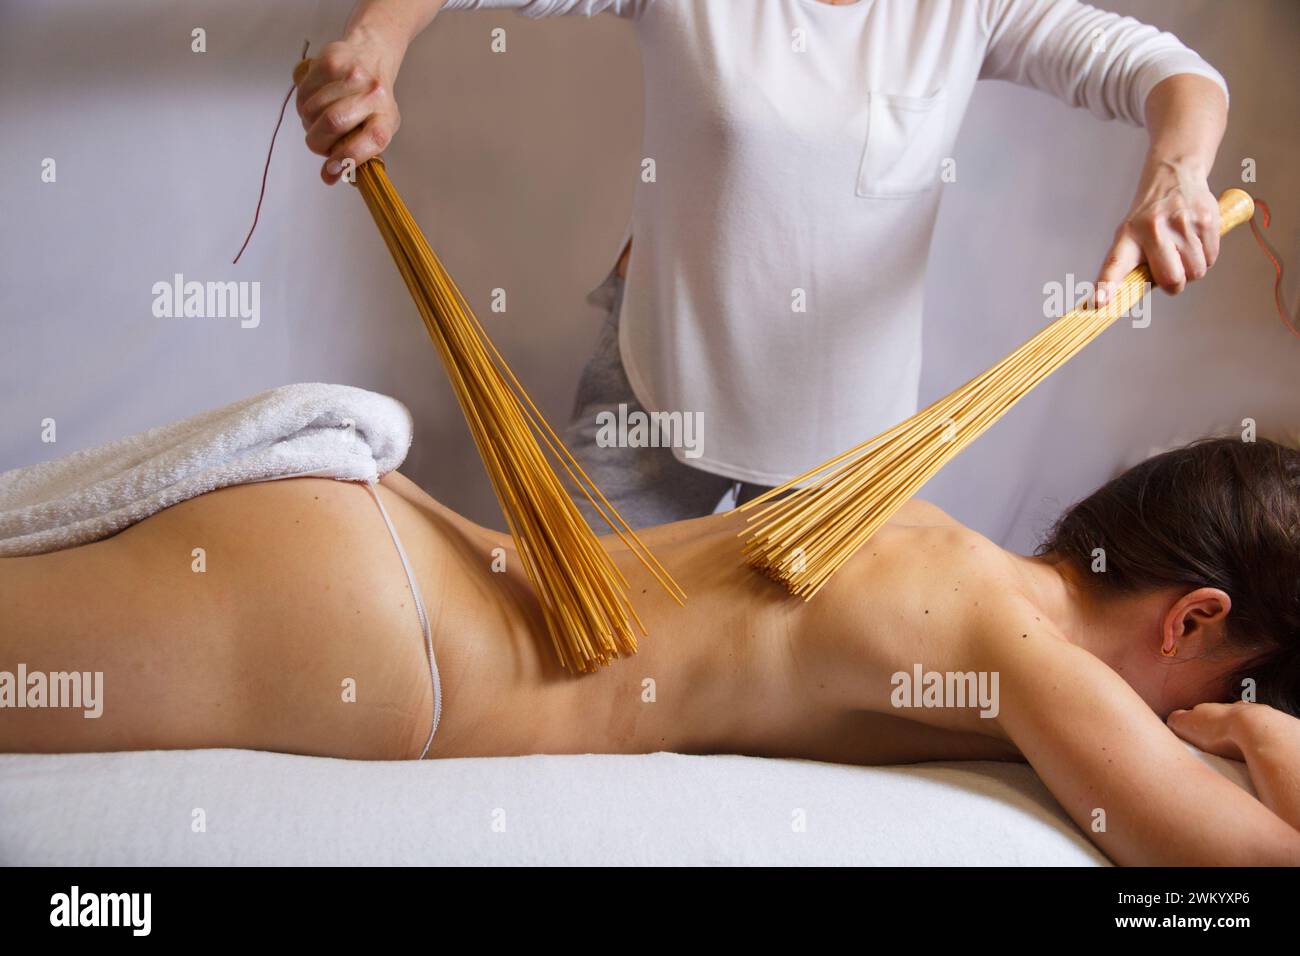 Back massage in the massage room with bamboo brooms. Massage therapist massaging woman's back with bamboo.horizontal side view,relaxing massage concep Stock Photo